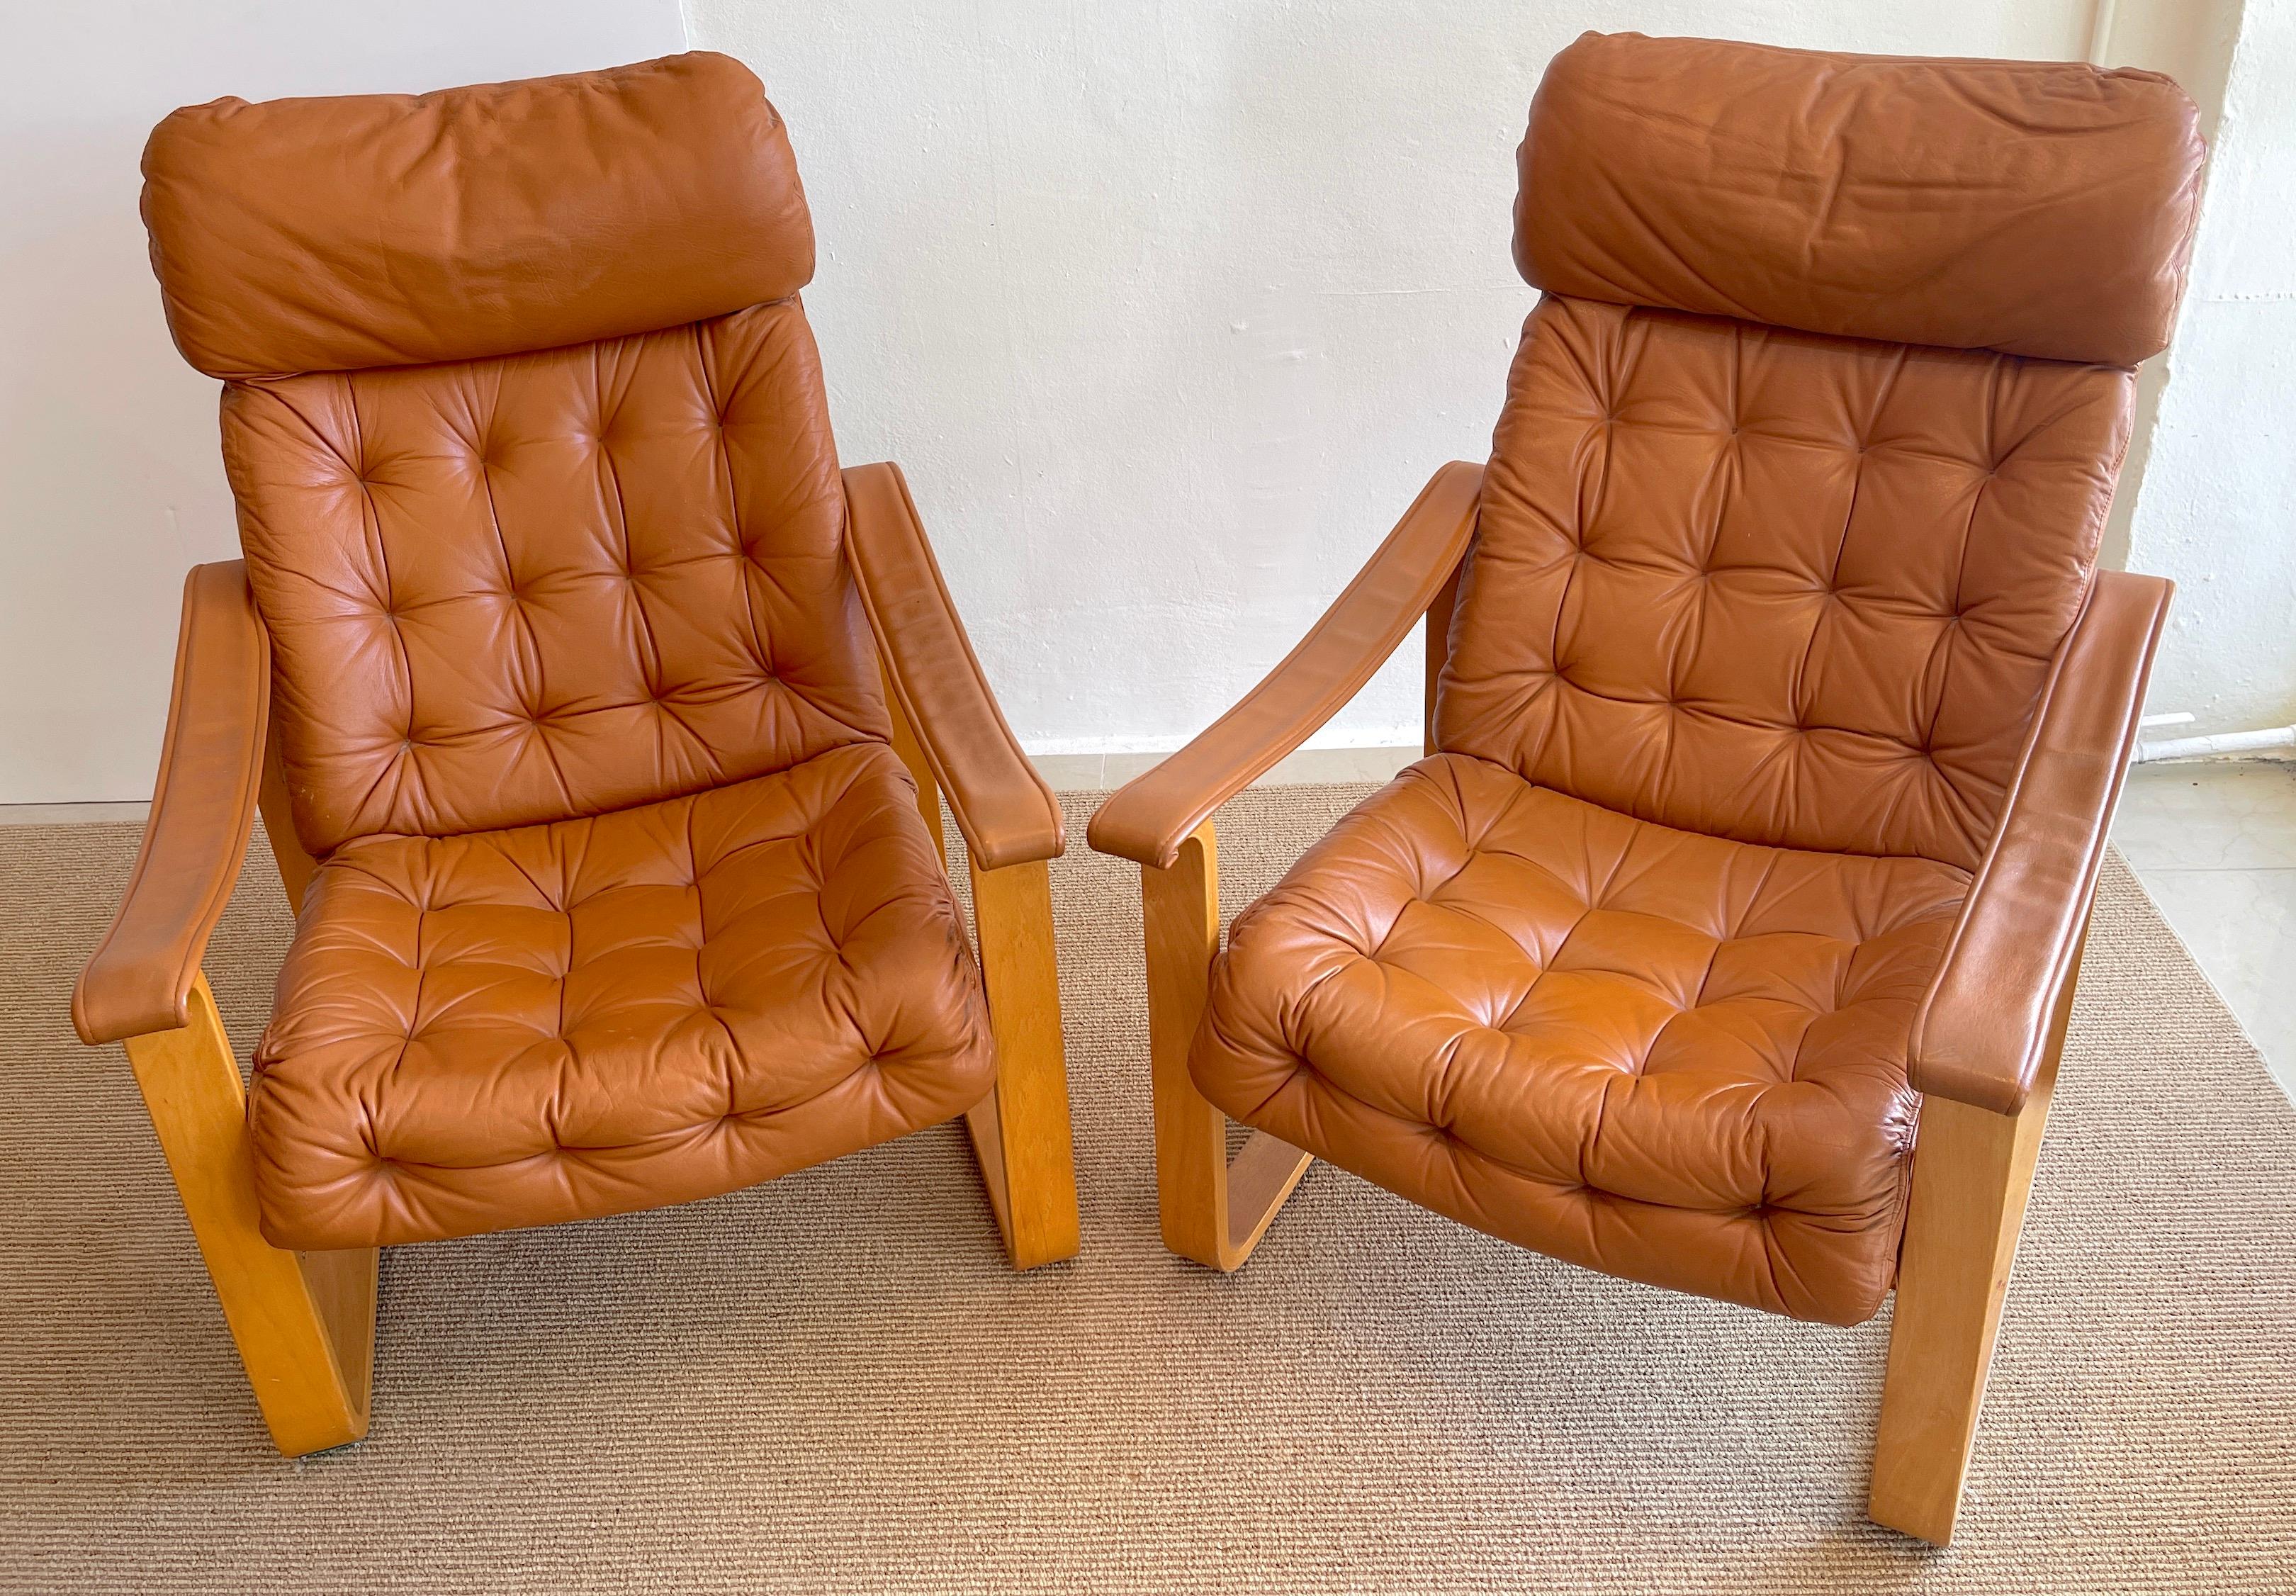 Pair of Danish cognac leather club chairs, circa 1960s 
Made in Finland by OY BJ. Dahlqvist for Hounekalutehads-Mobelfabrik.
The leather tufted leather backrest and seats and armrest, supported by bentwood frames.
Each chair measures 38